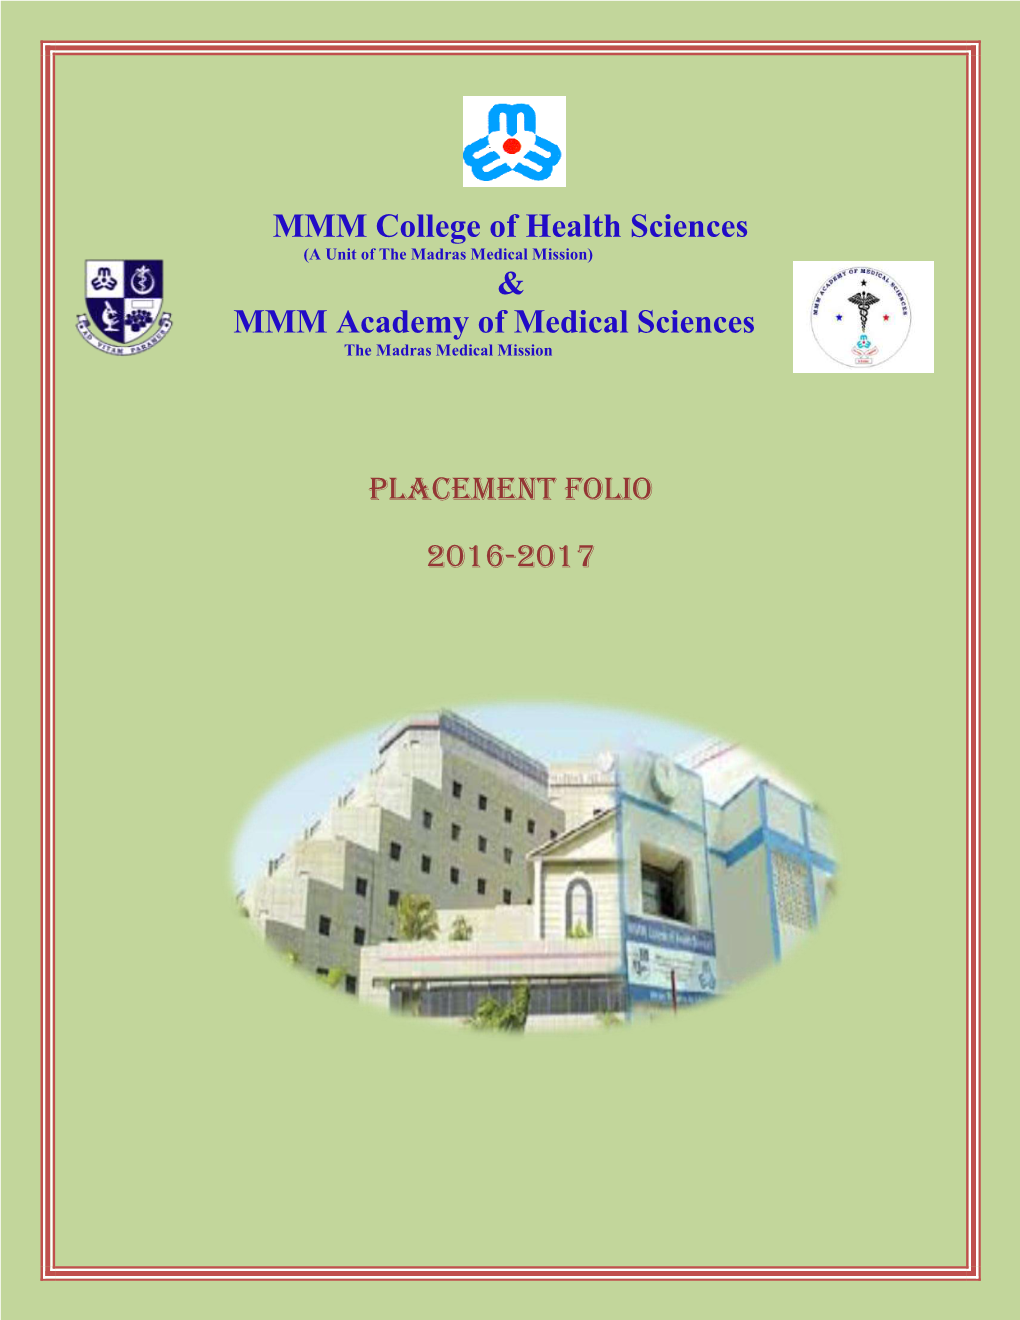 MMM Academy of Medical Sciences the Madras Medical Mission